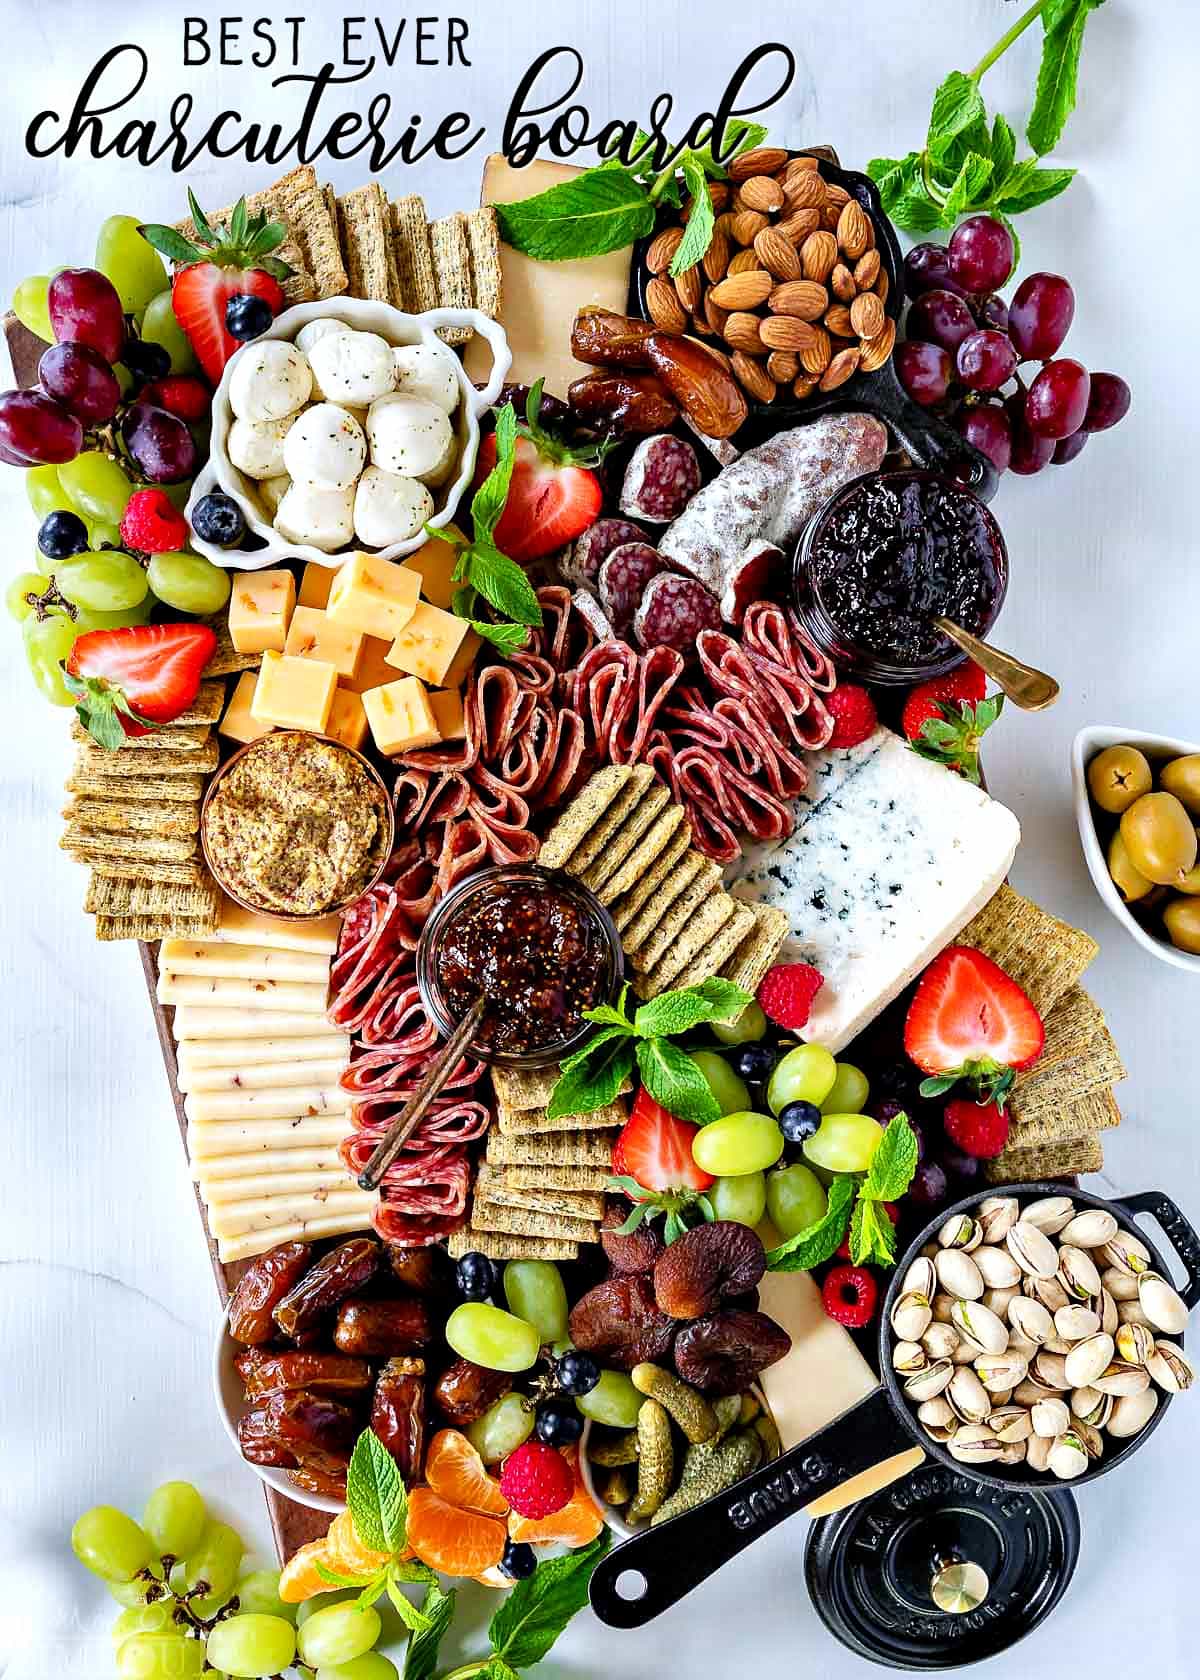 Charcuterie Boards and More!